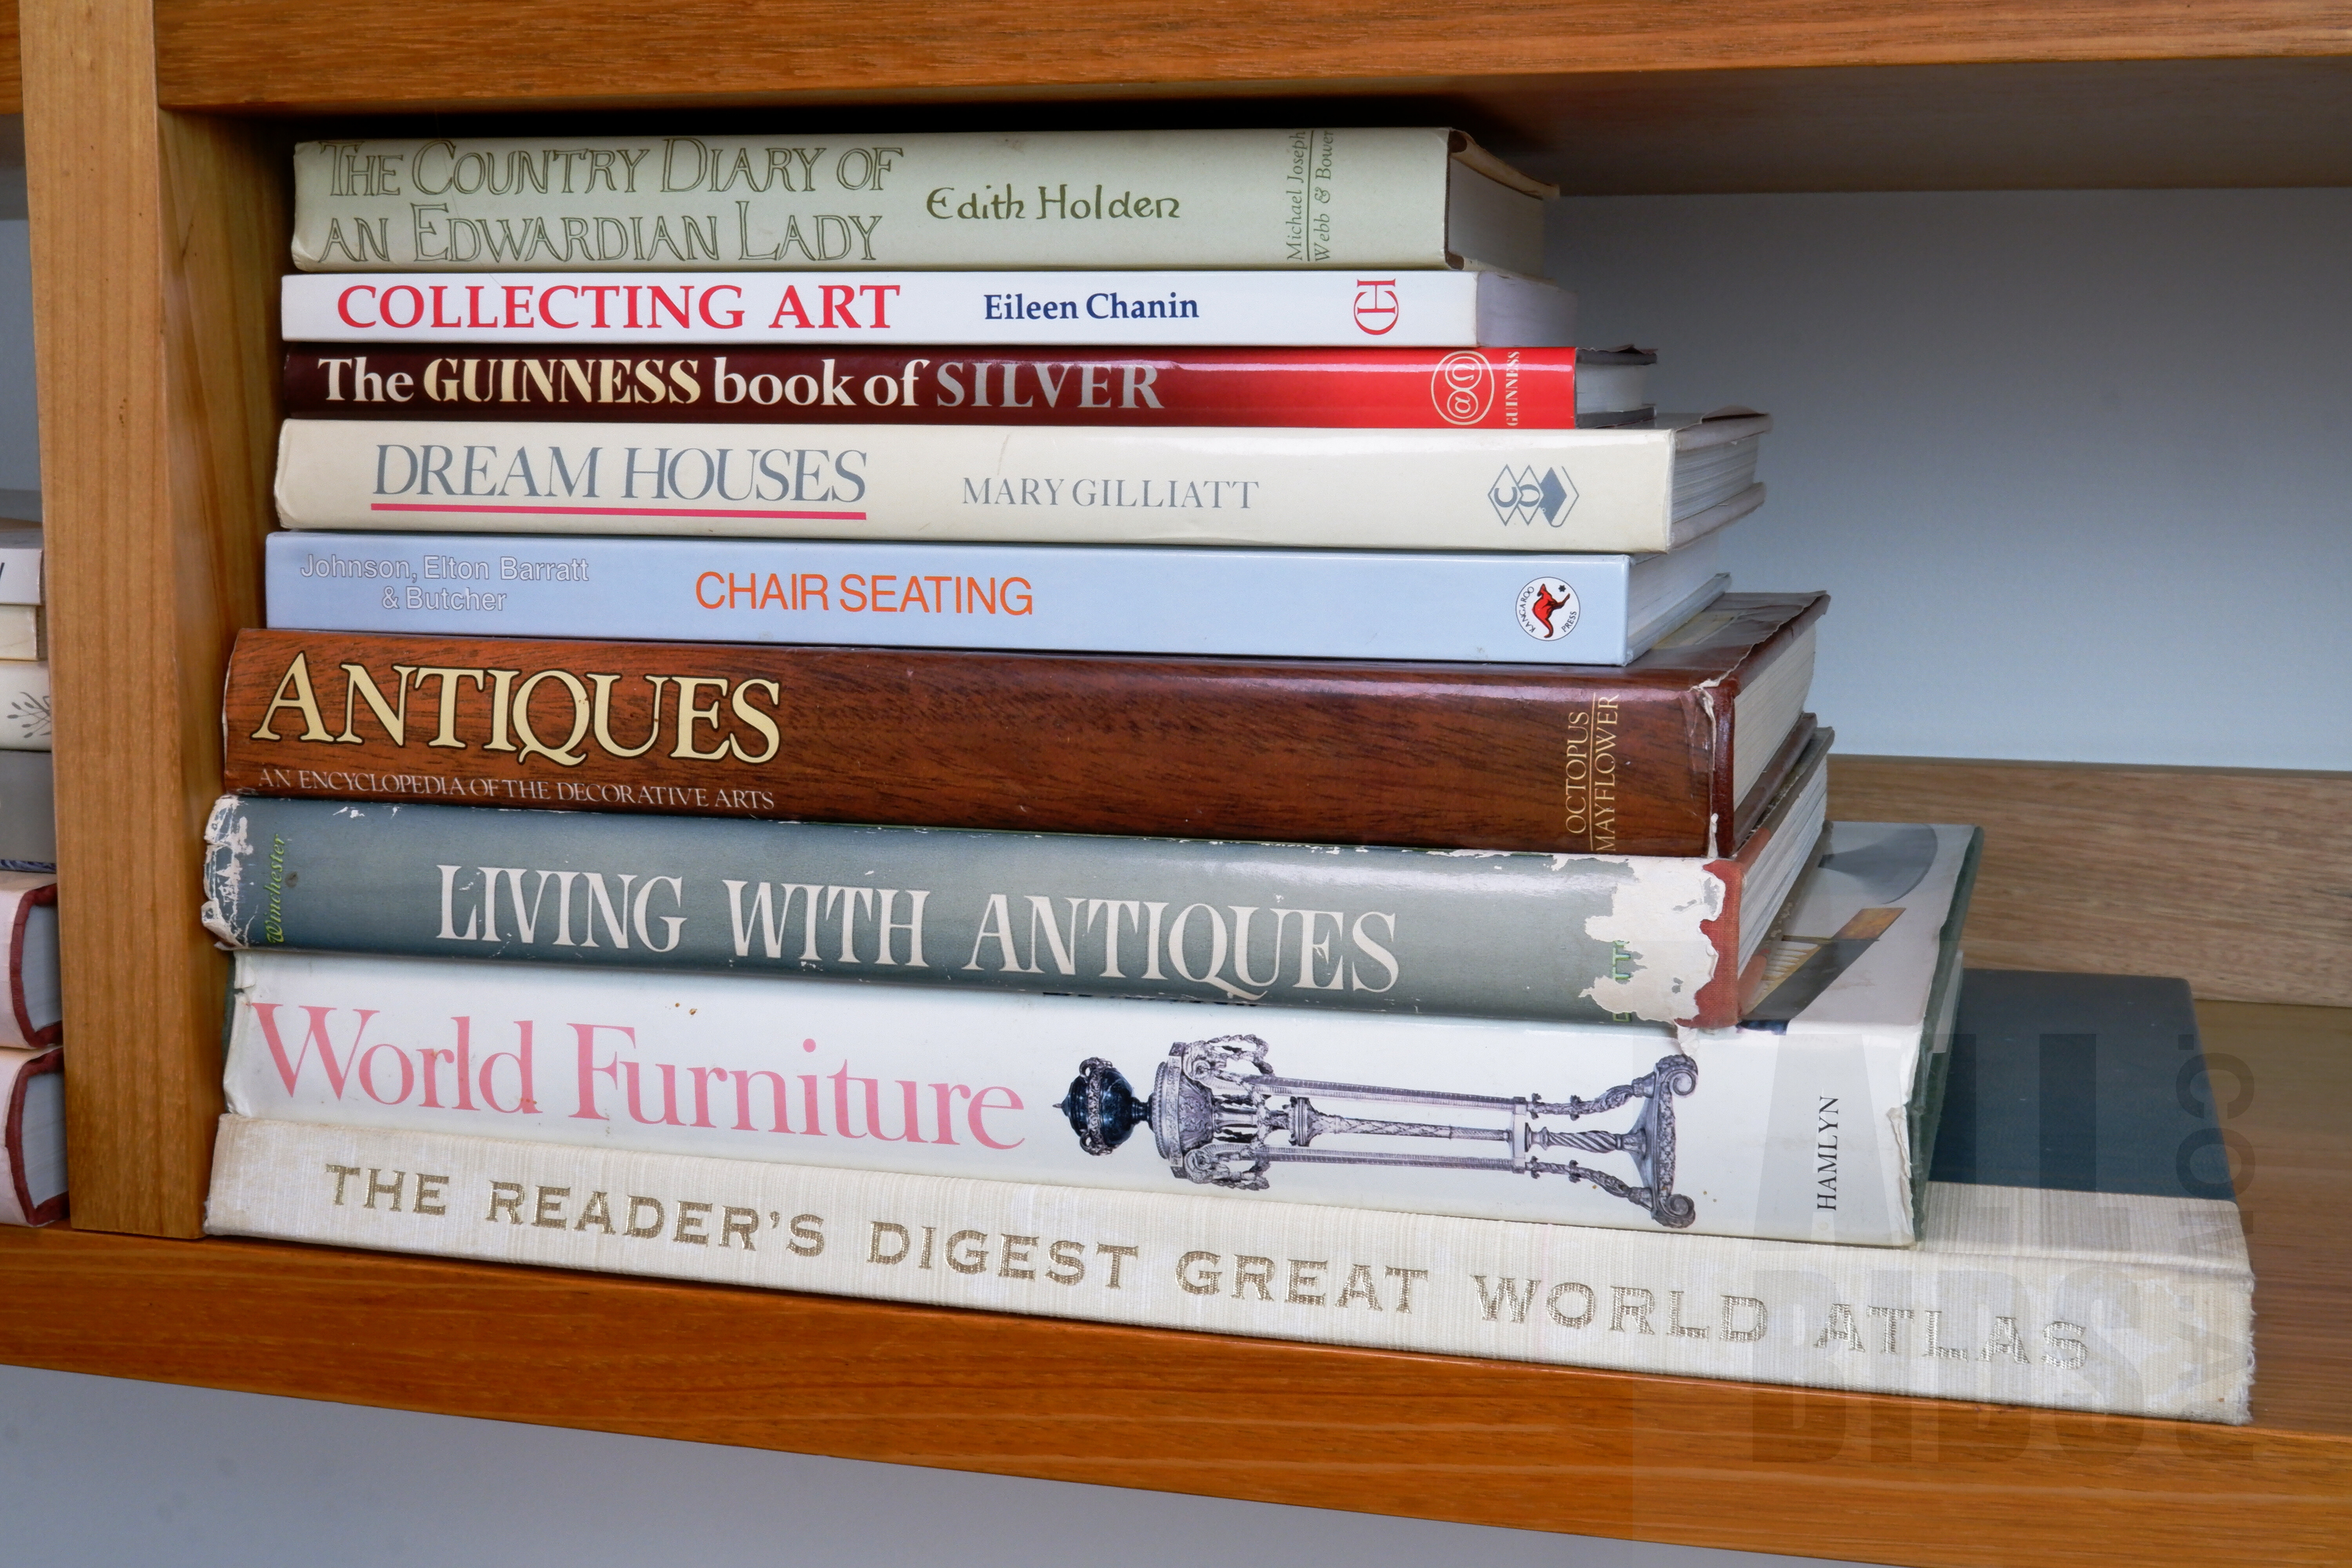 'Collection of Art and Antique Reference Books, Including Living with Antiques and World Furniture'